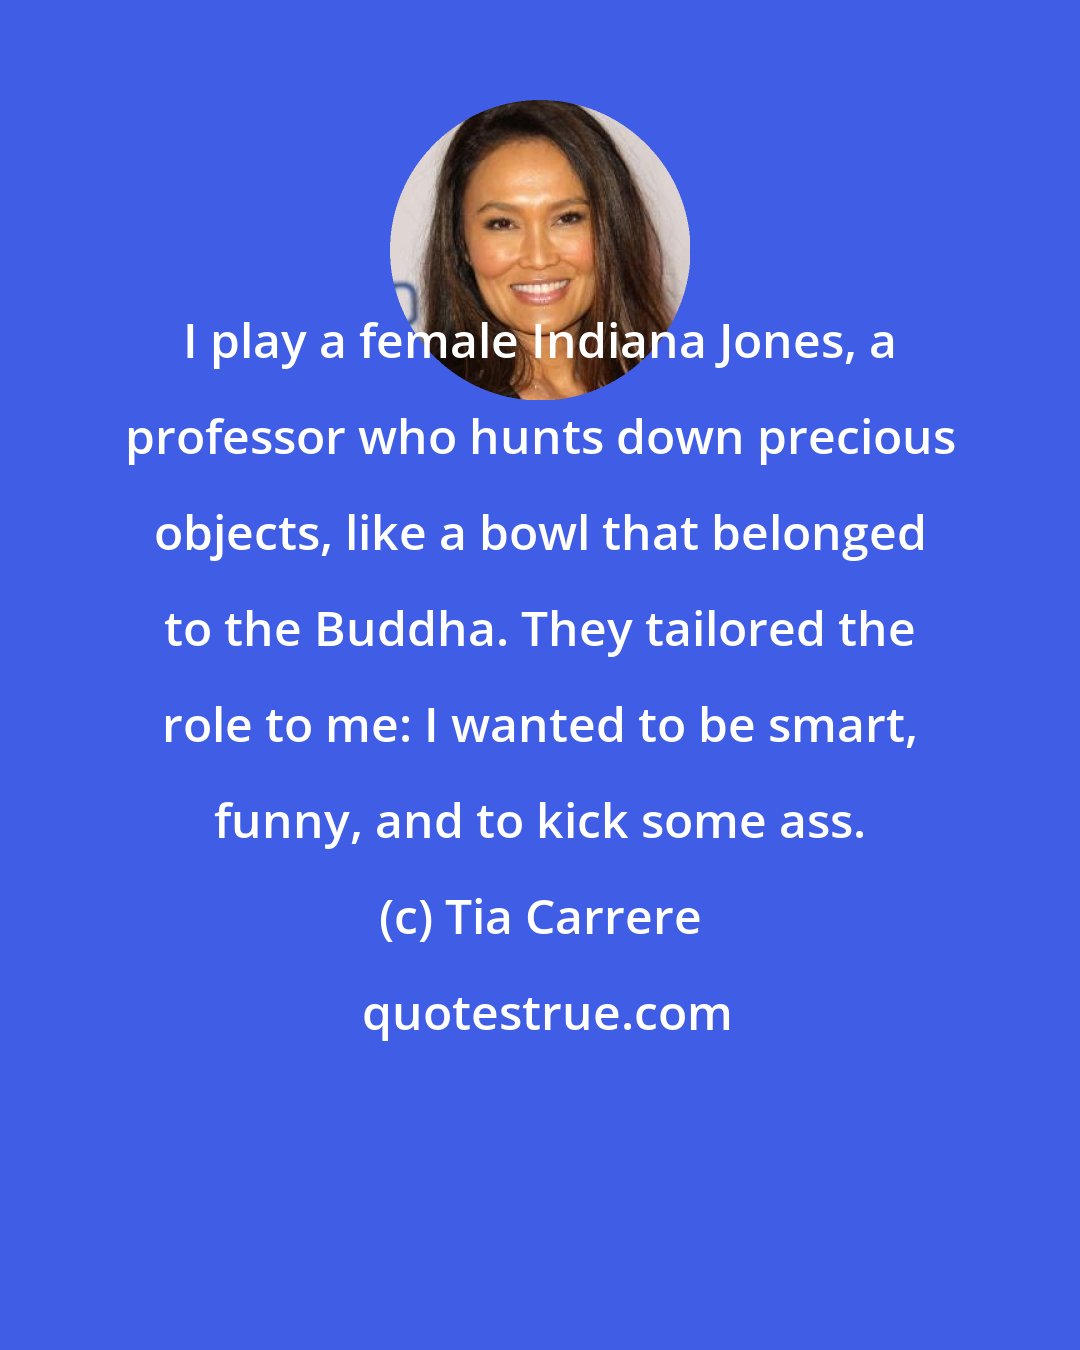 Tia Carrere: I play a female Indiana Jones, a professor who hunts down precious objects, like a bowl that belonged to the Buddha. They tailored the role to me: I wanted to be smart, funny, and to kick some ass.